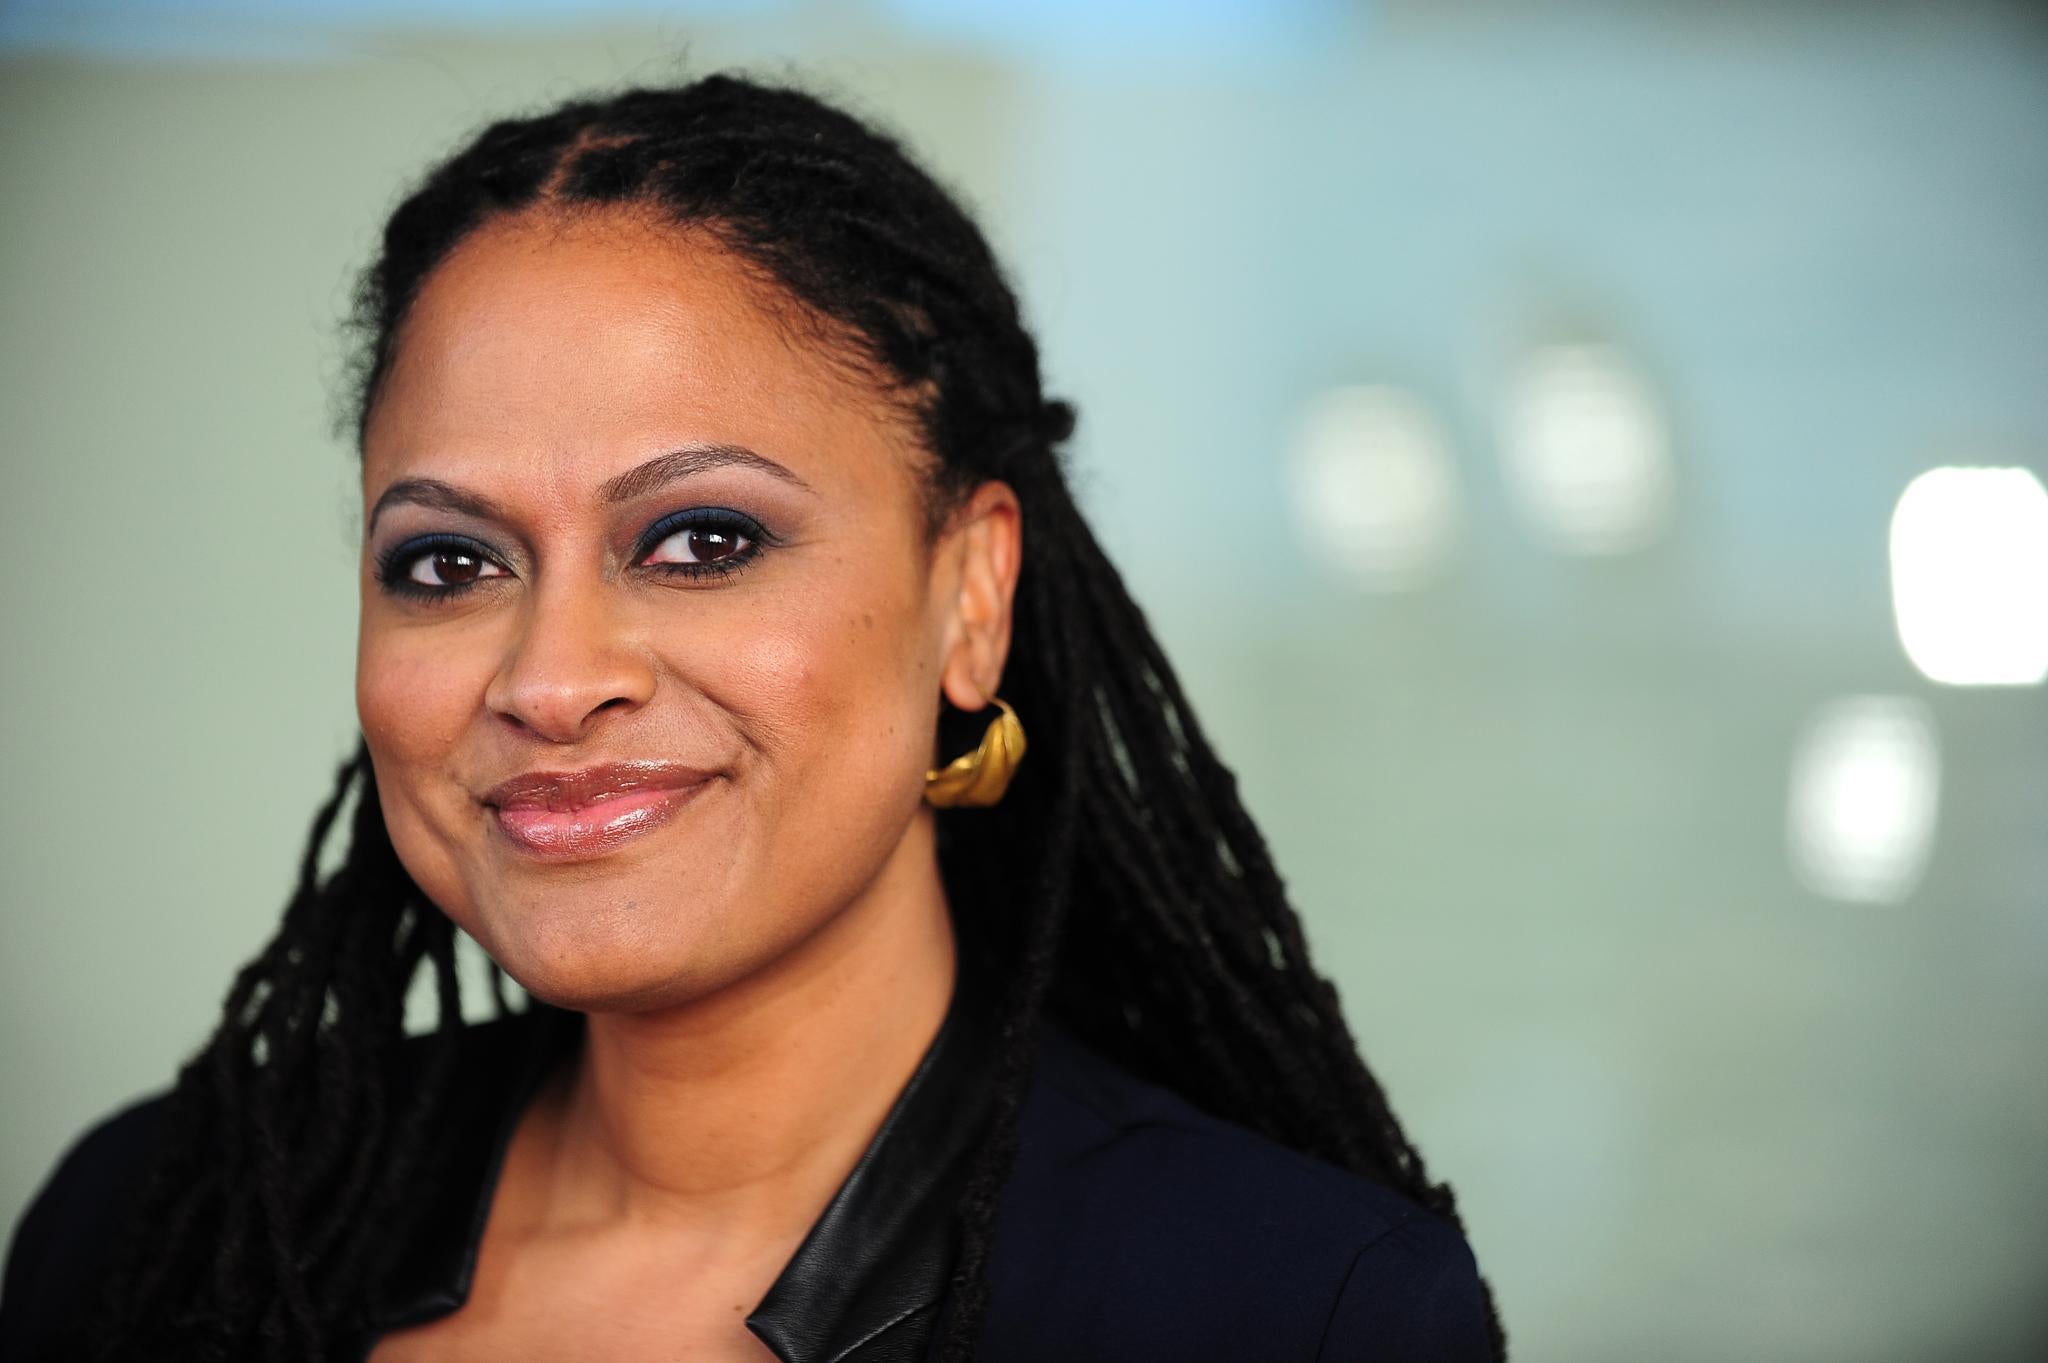 DuVernay Gives Advice on Hollywood, Says ‘Follow the White Guys’
